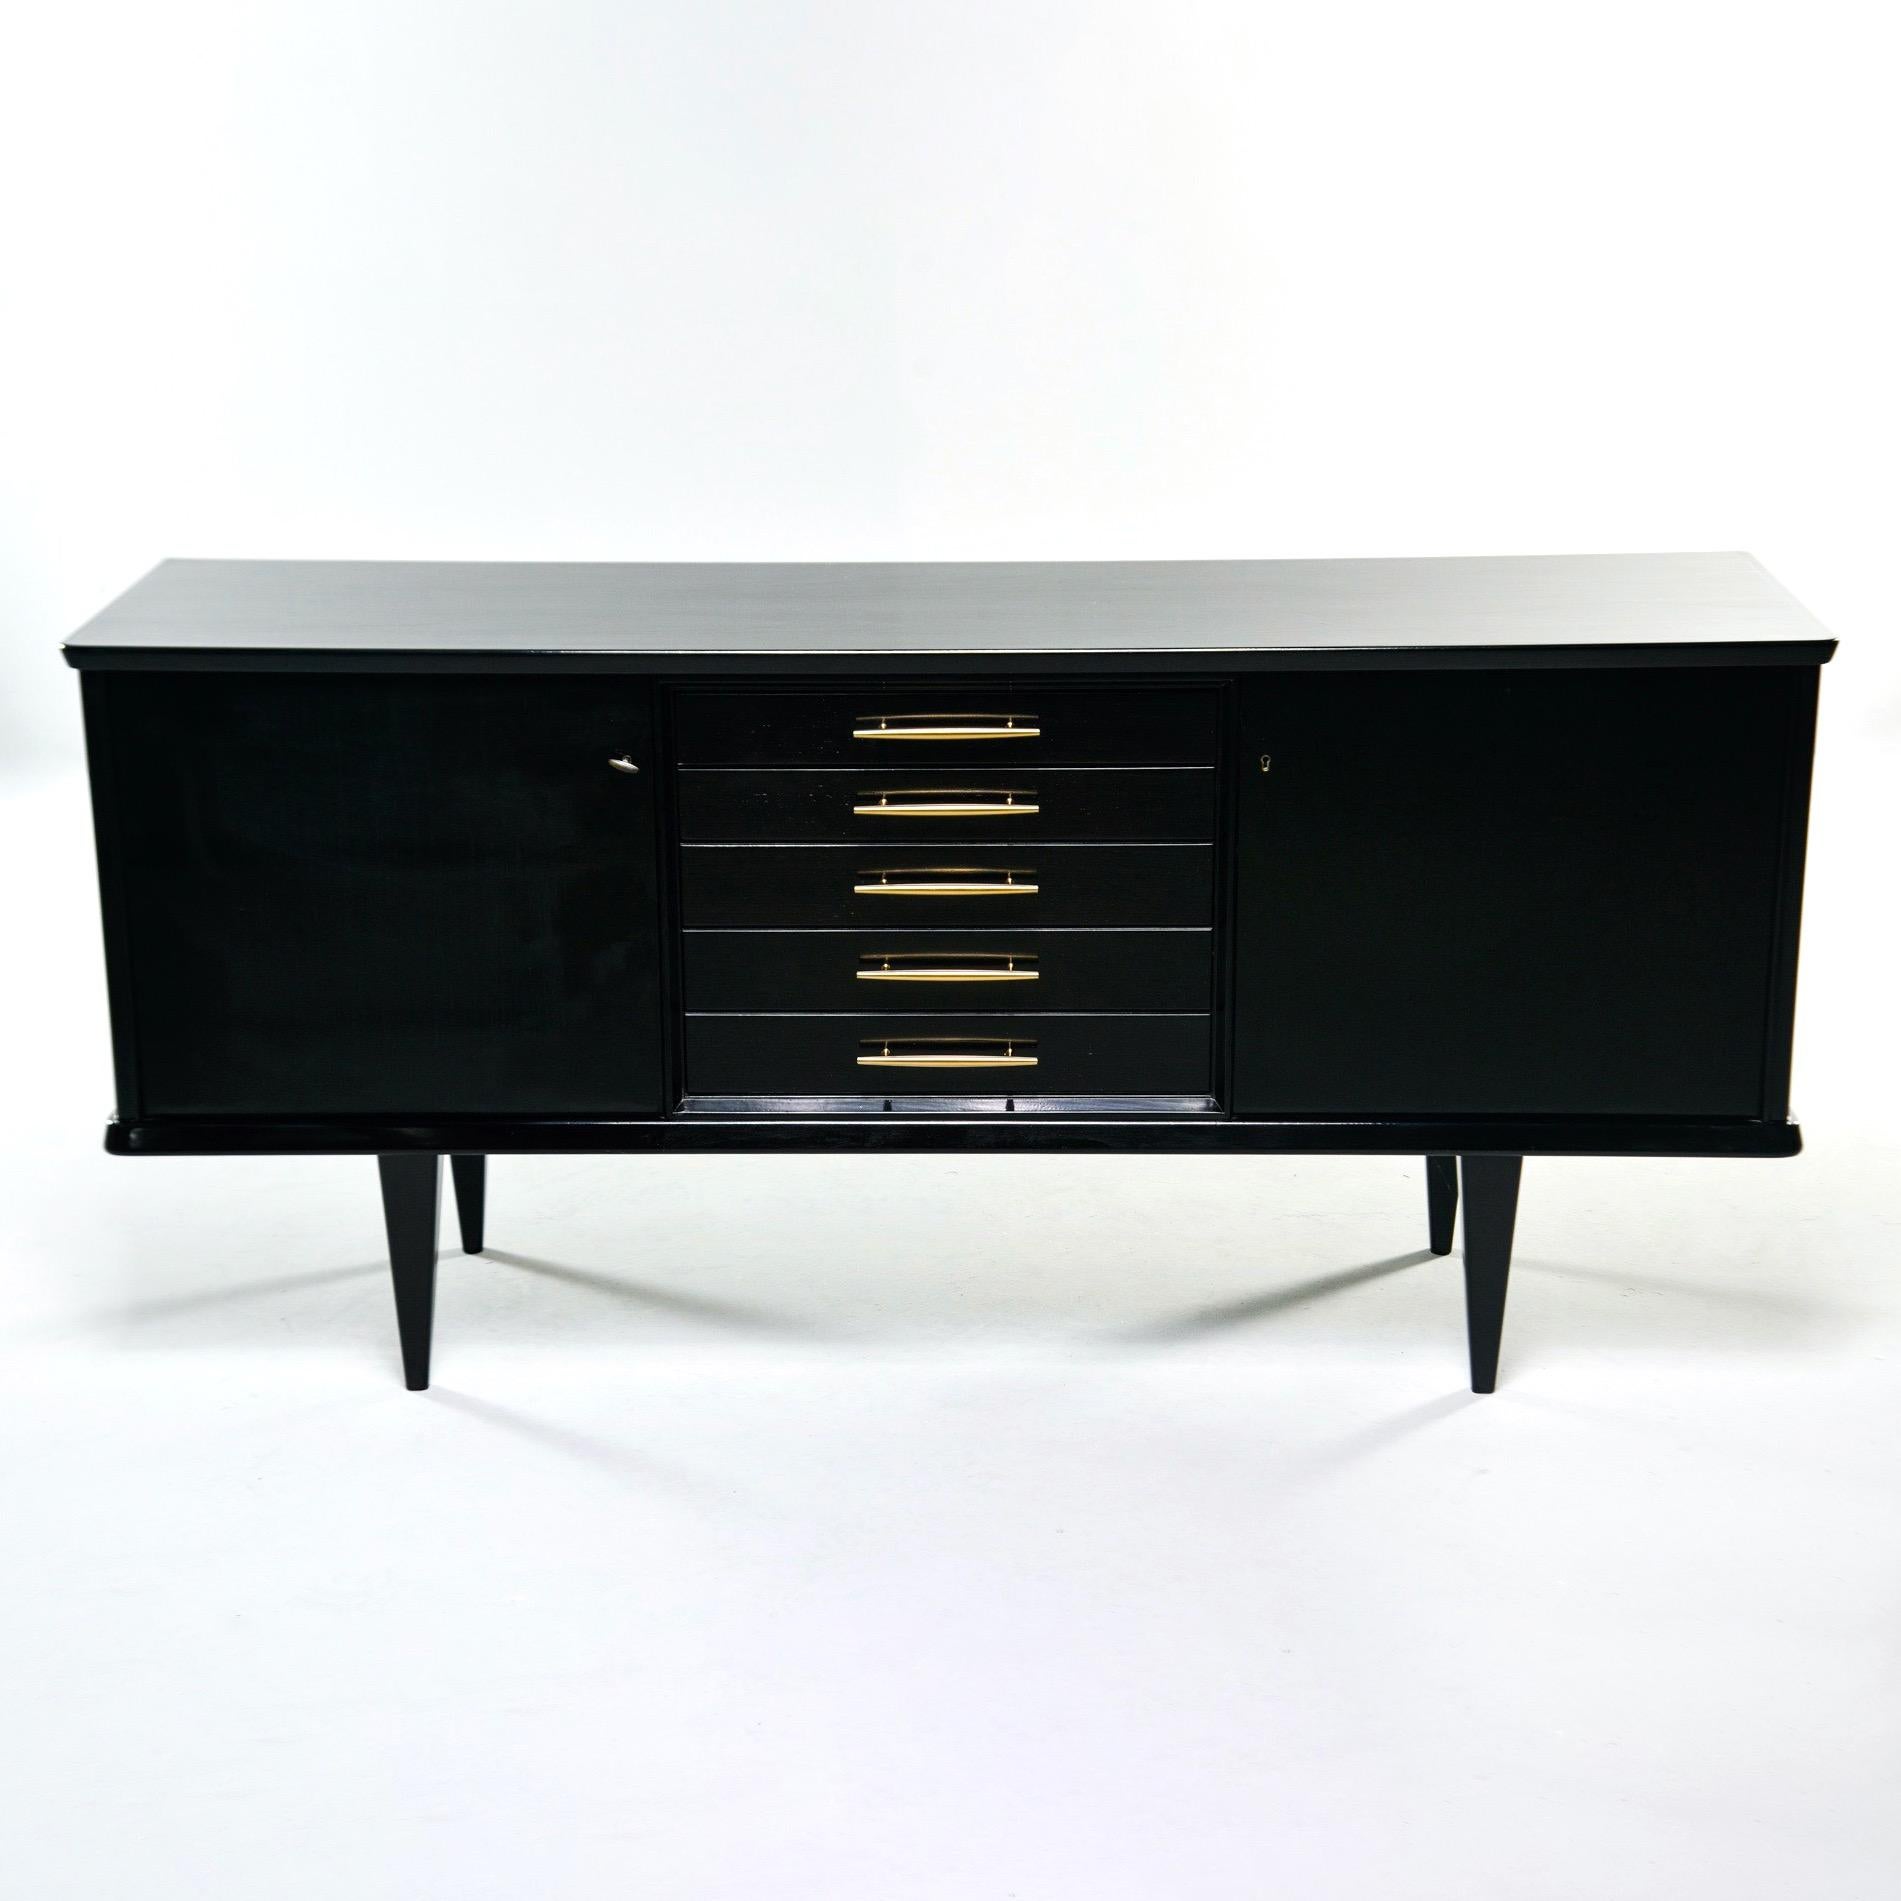 Found in England, this circa 1960s mahogany credenza has a new, professionally applied ebonized finish. Middle section features five functional drawers with new, streamlined brass hardware. Top two drawers are felt lined. Side compartments have